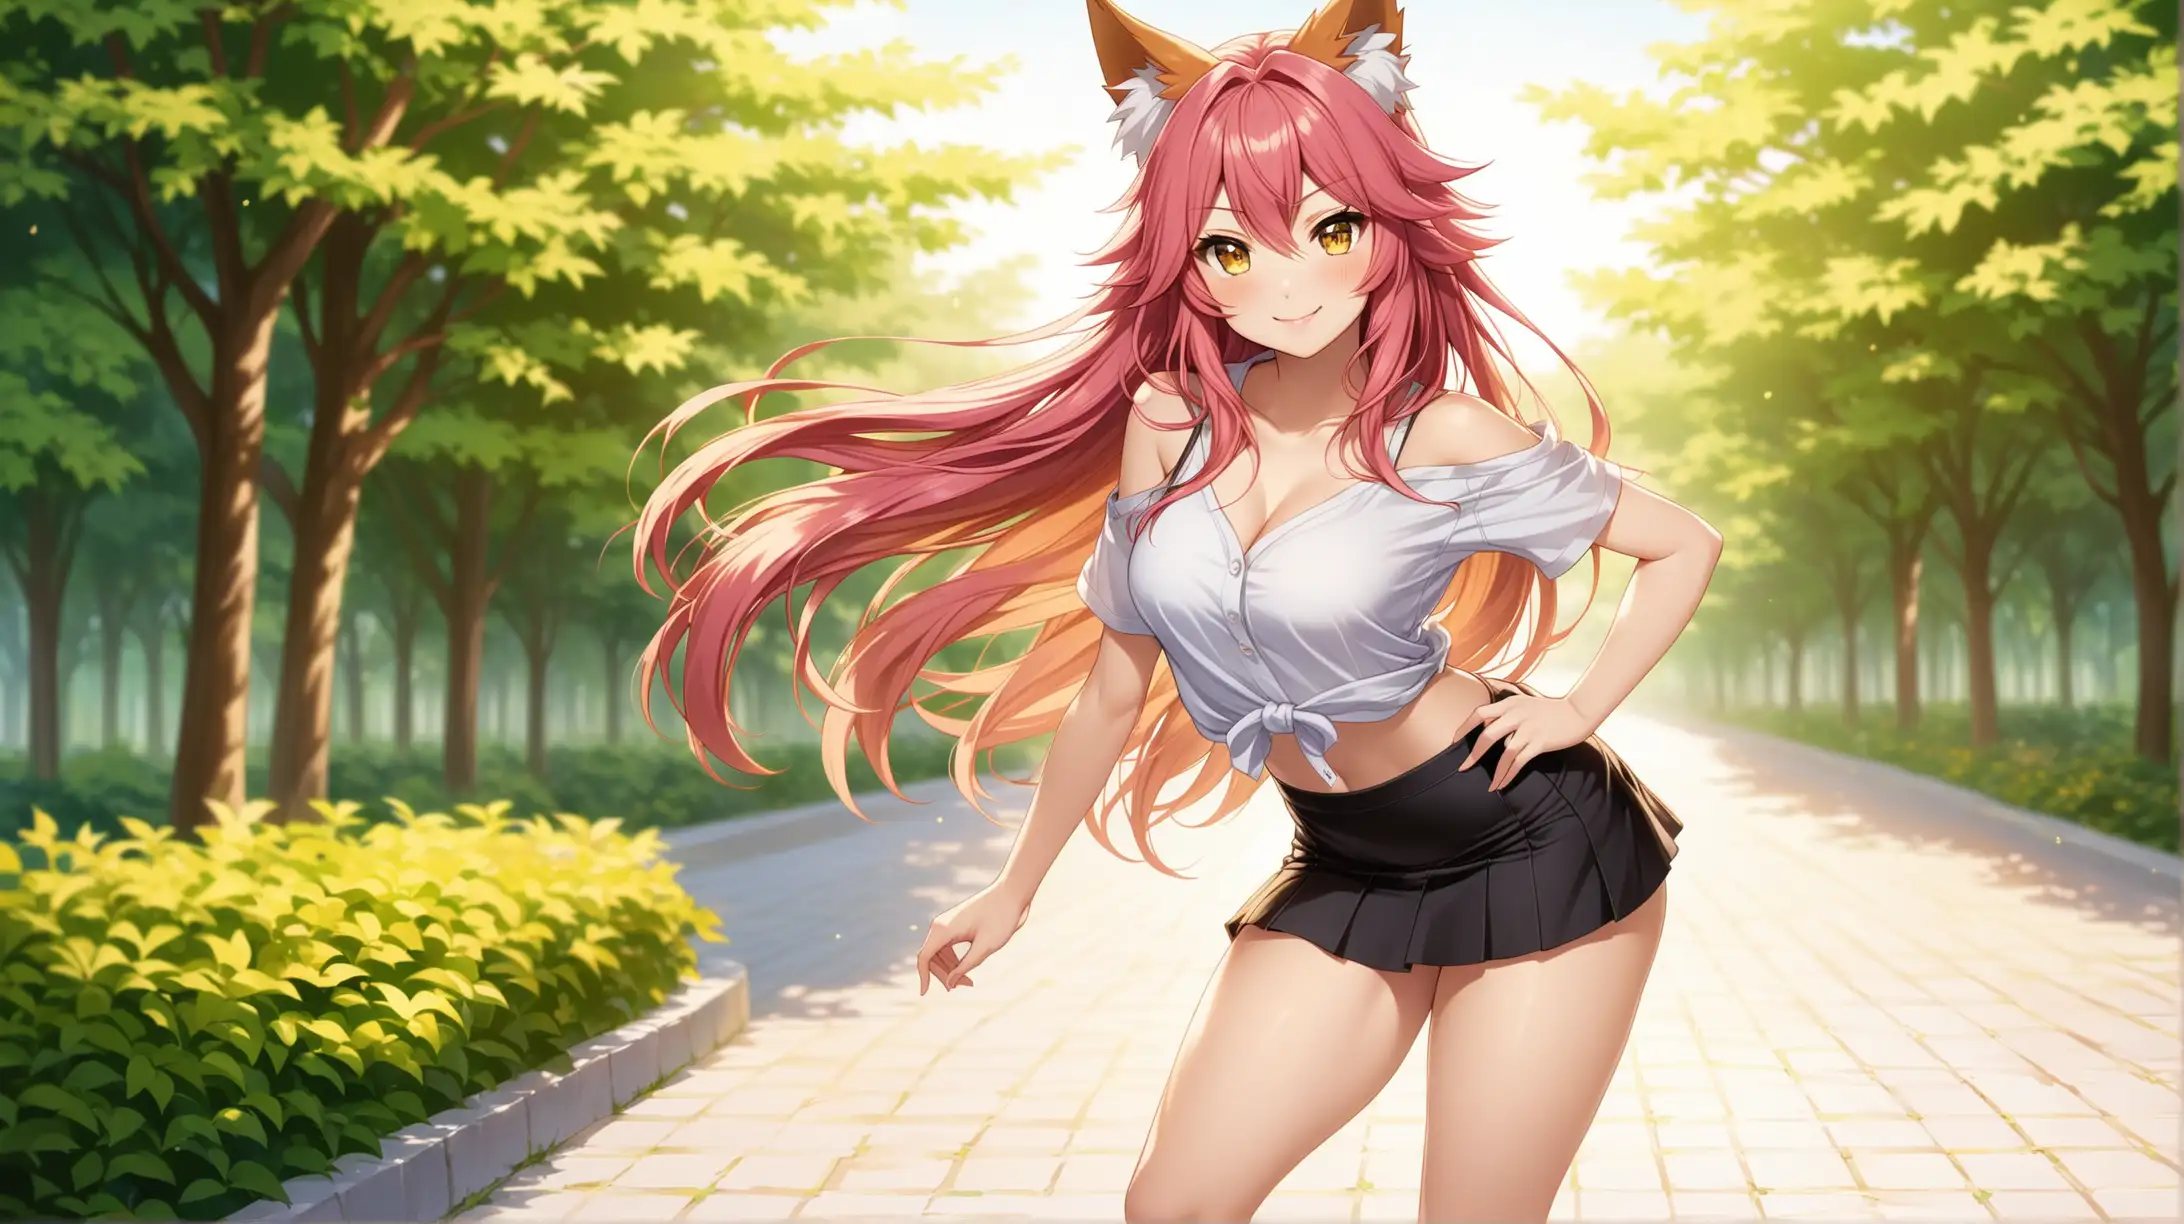 Tamamo no Mae Seductively Smiling Outdoors in Pink Hair and Mini Skirt